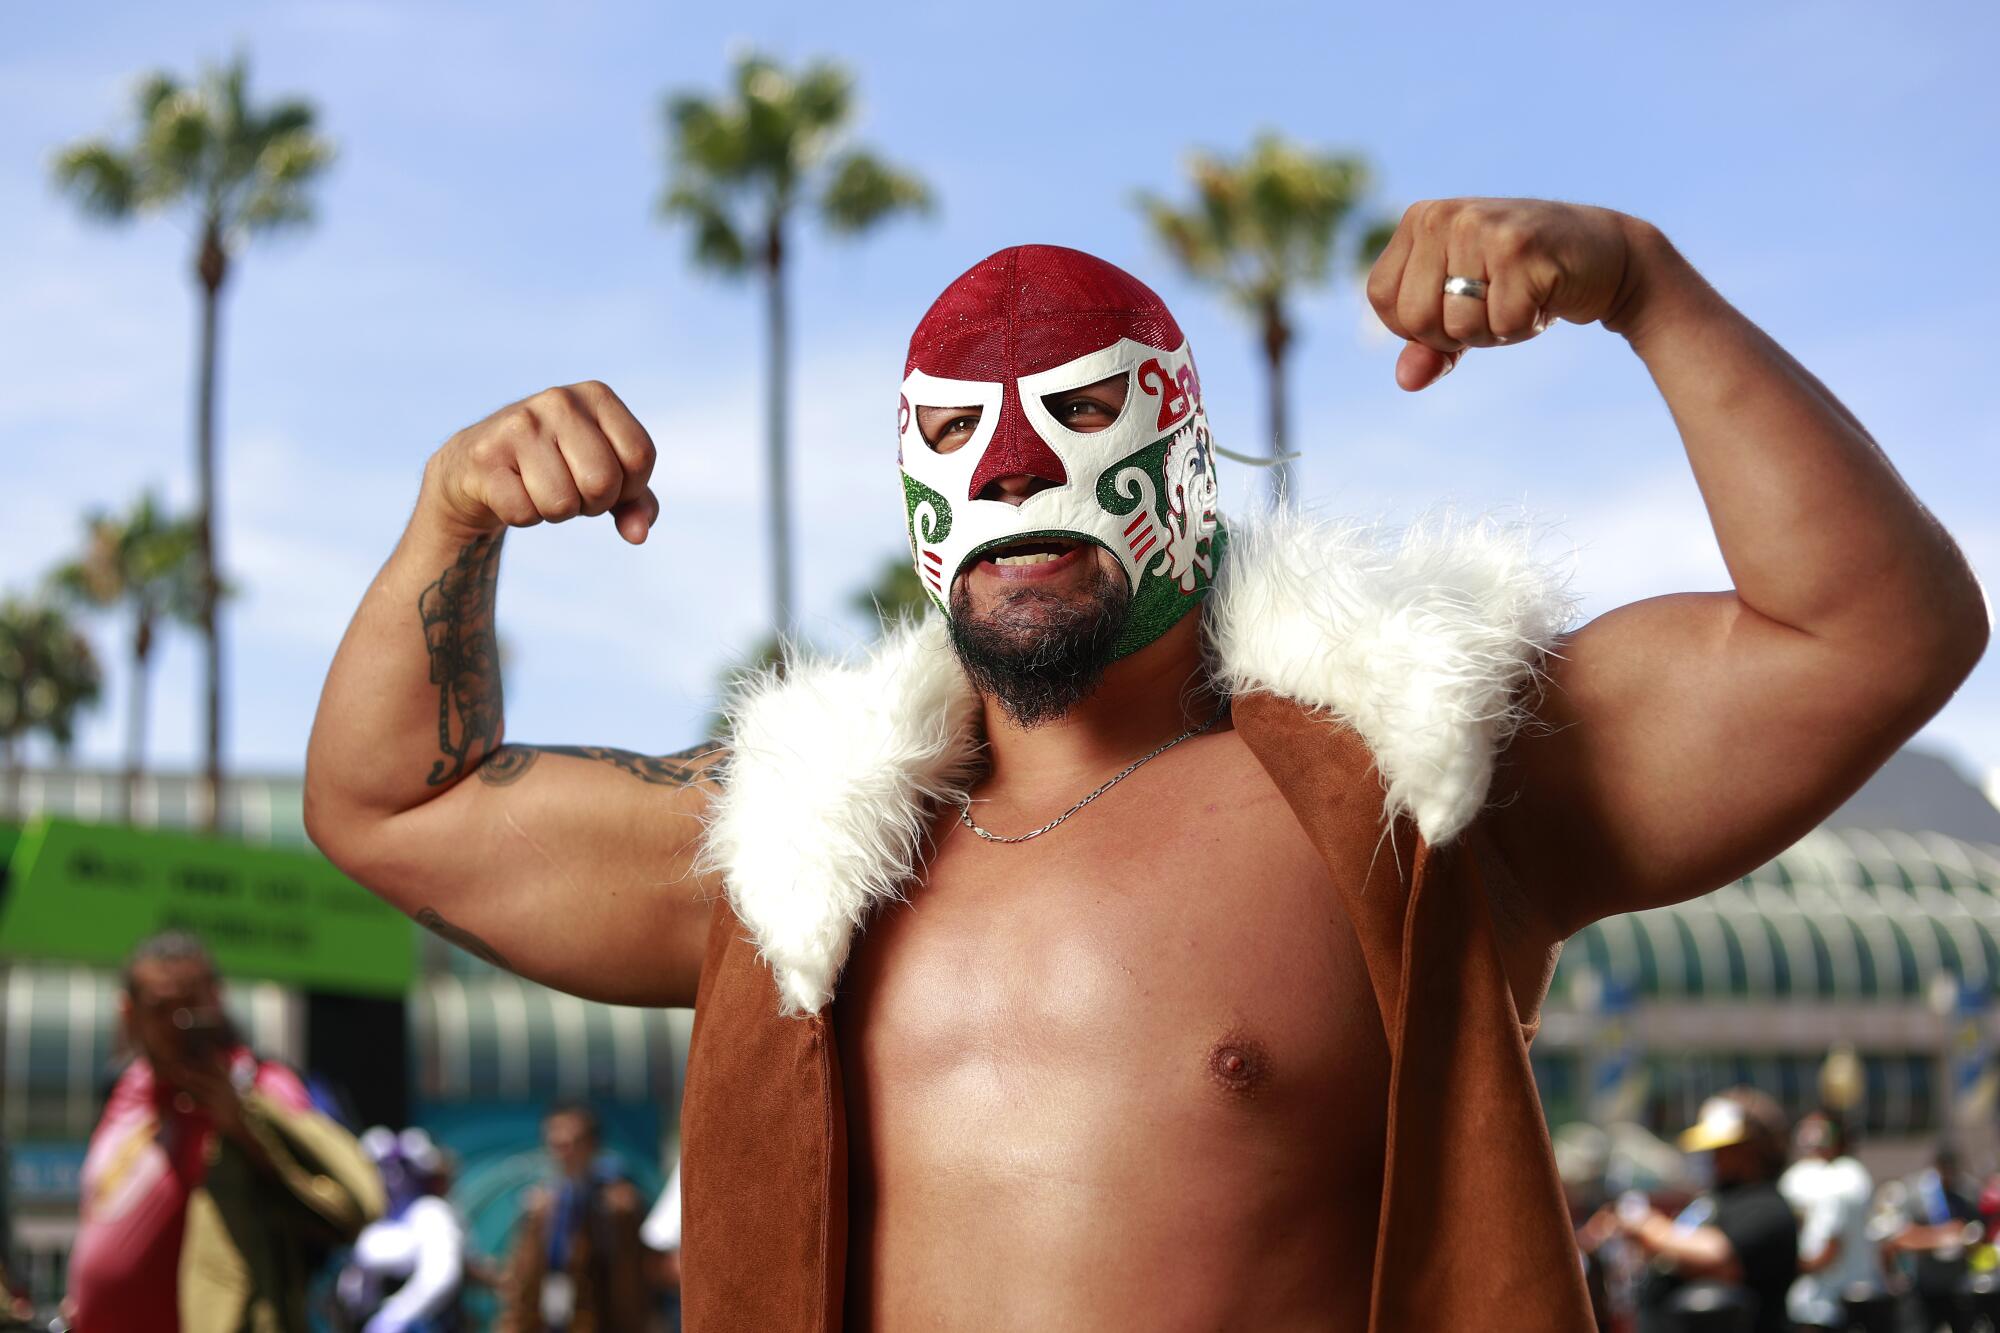 Canek Jr. of Mexico City dressed as his own wrestling character at Comic-Con.